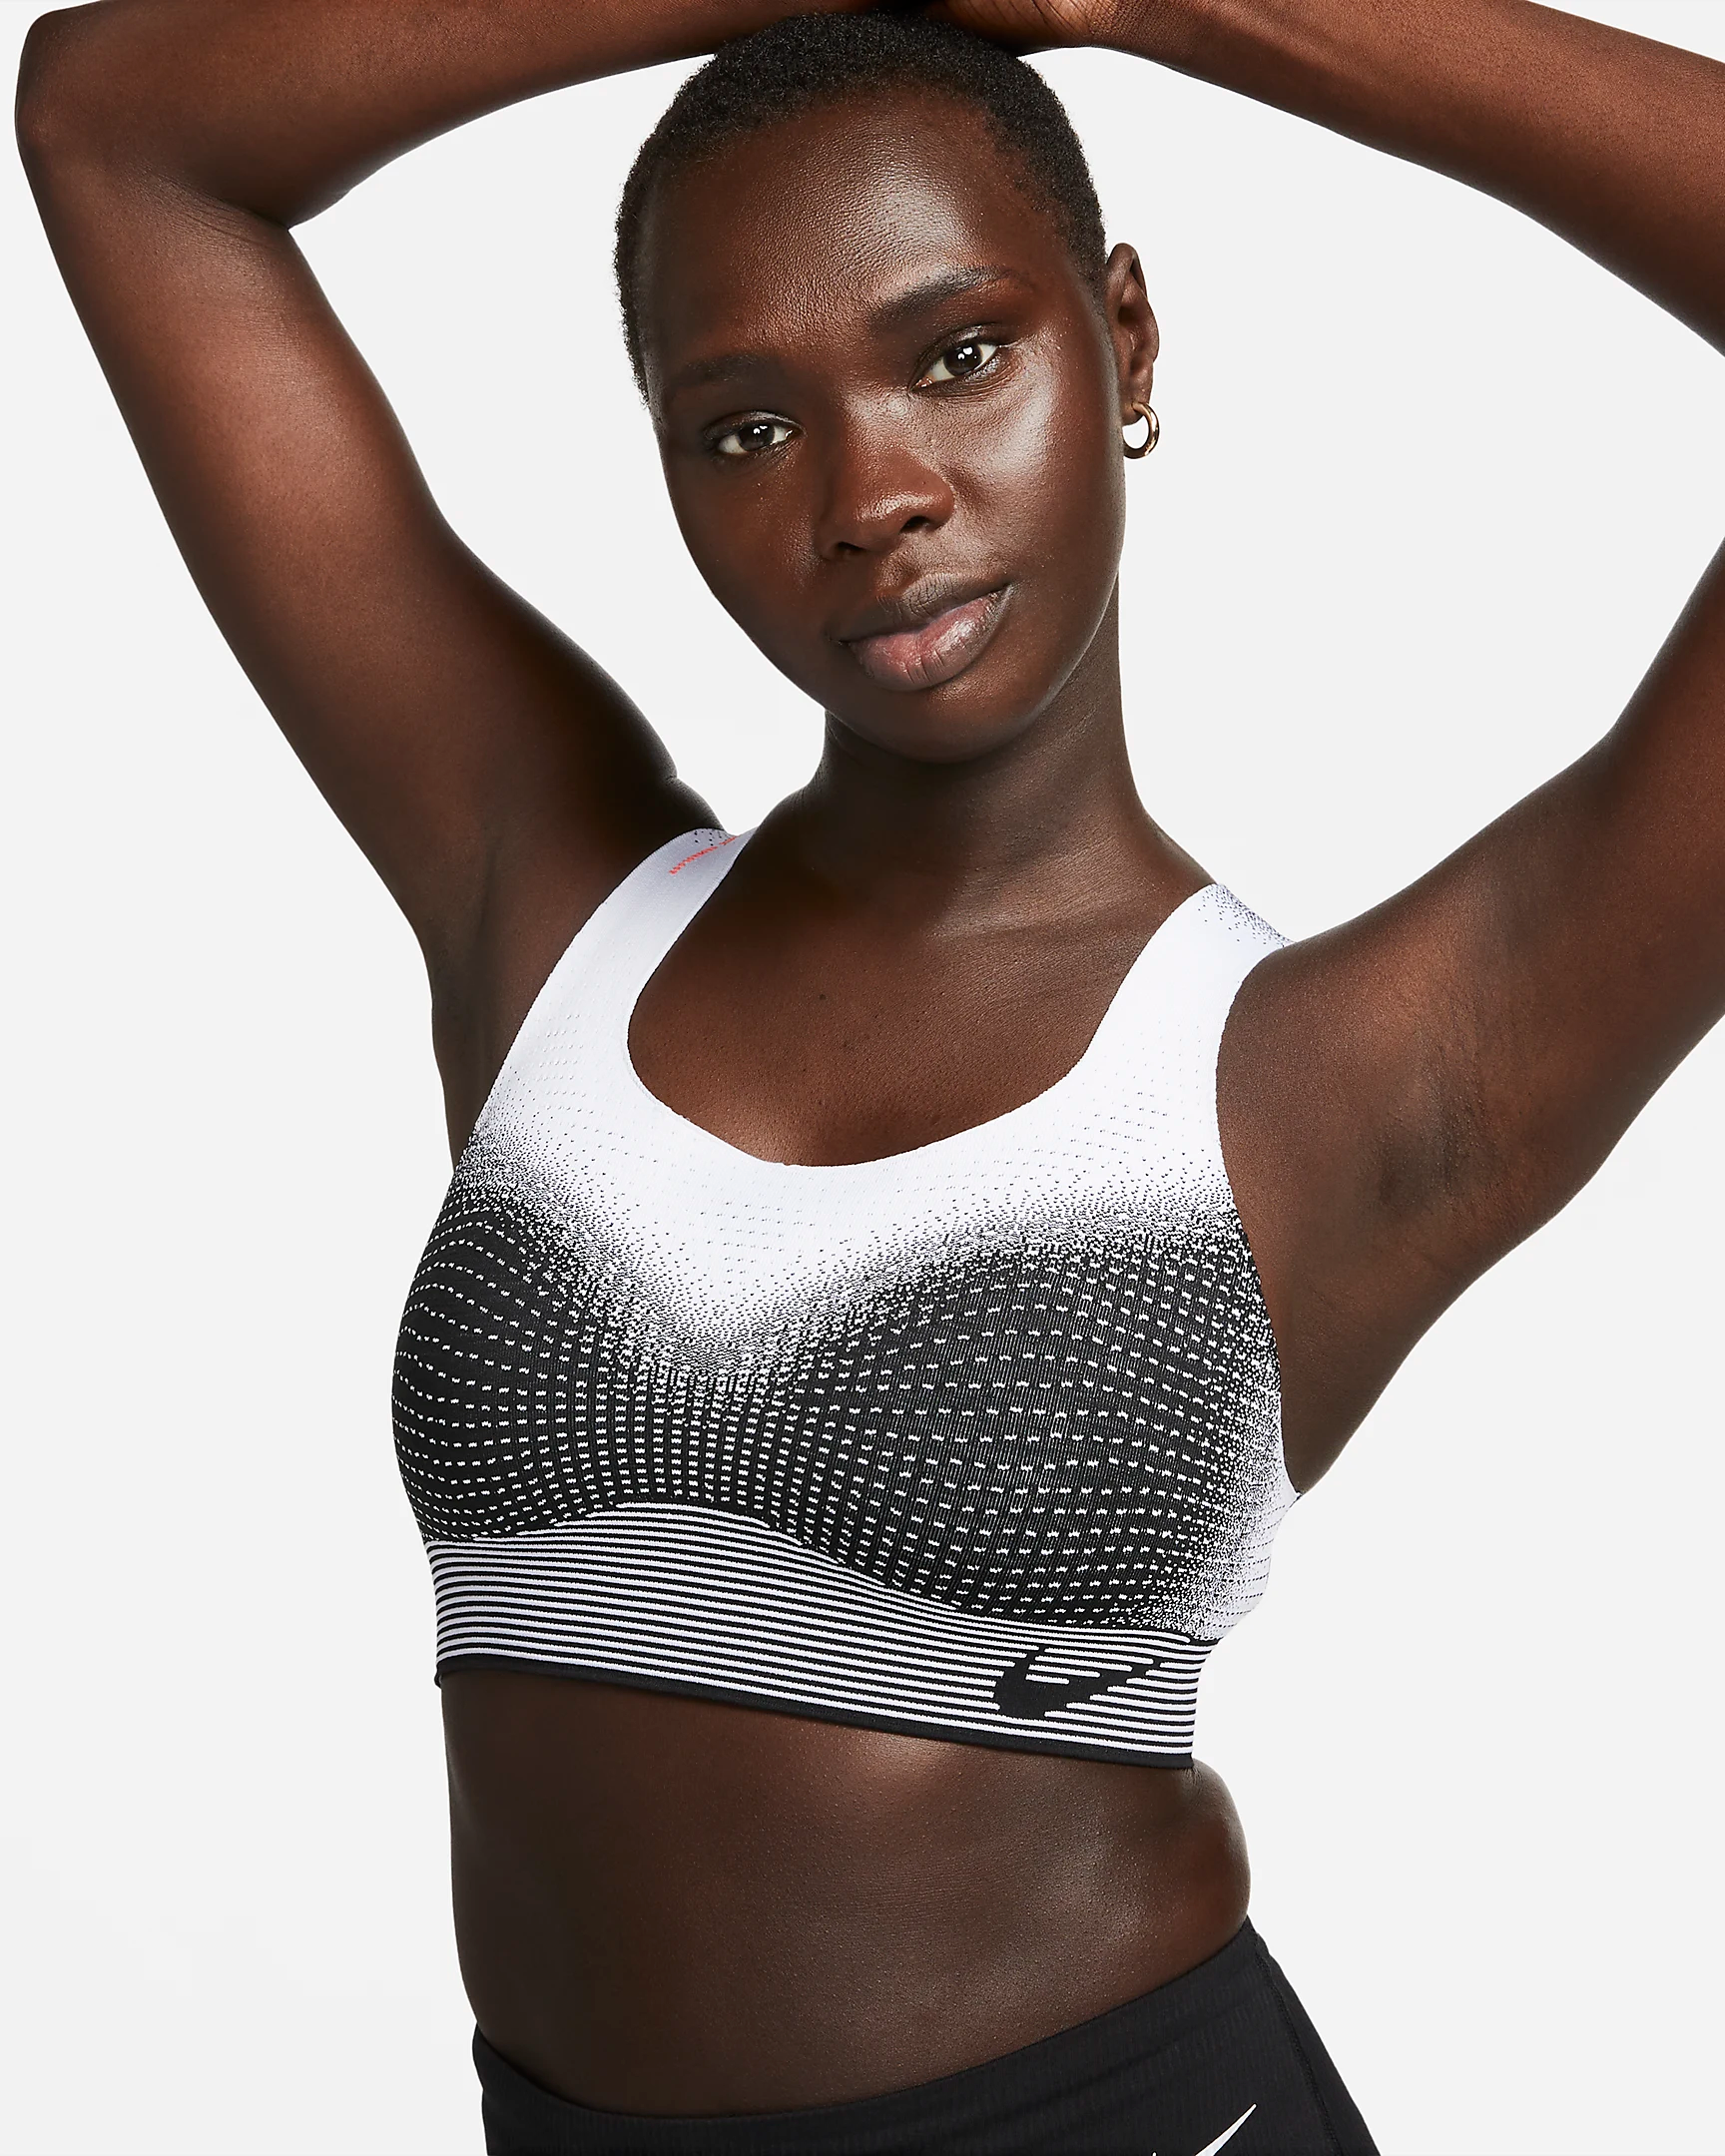 Nike Debuts a Flyknit Bra—Does It Live Up to the Hype?